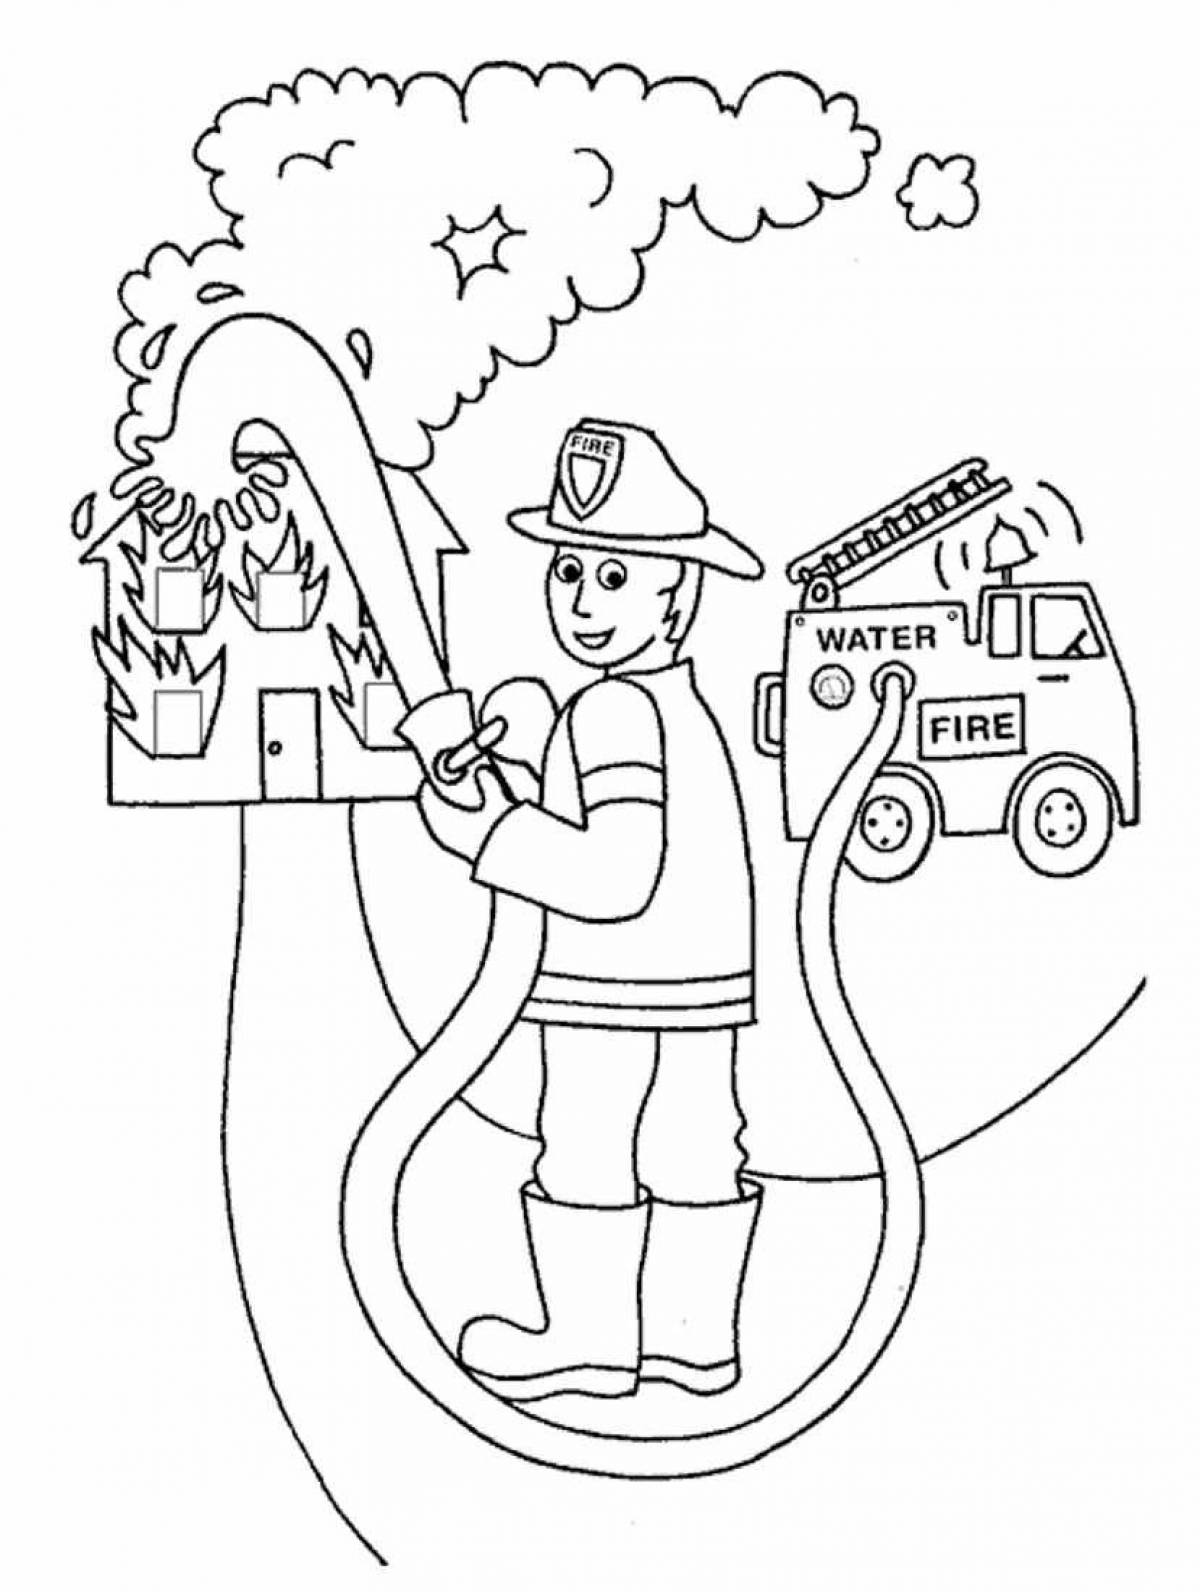 Innovative firefighter coloring book for kids